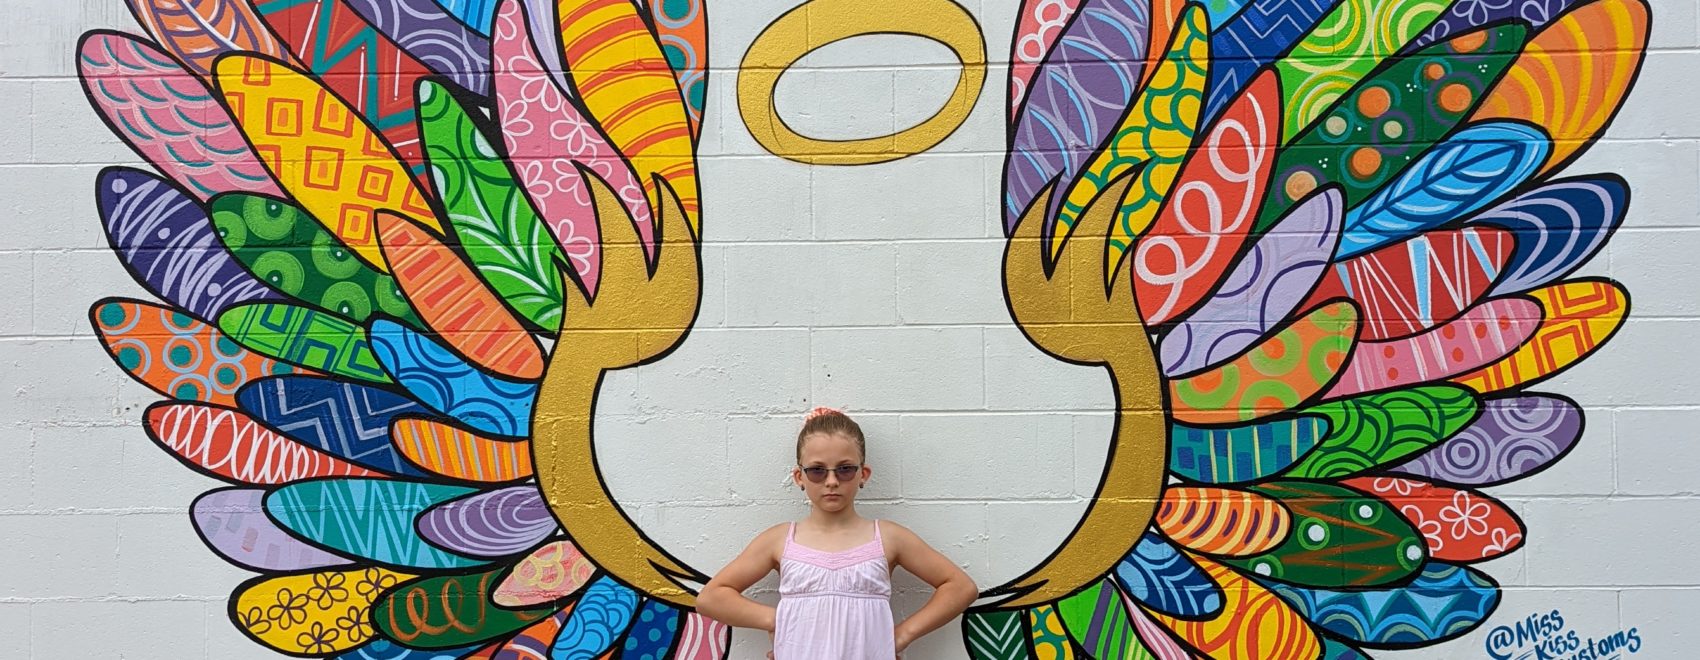 Ada standing in front of a mural of wings